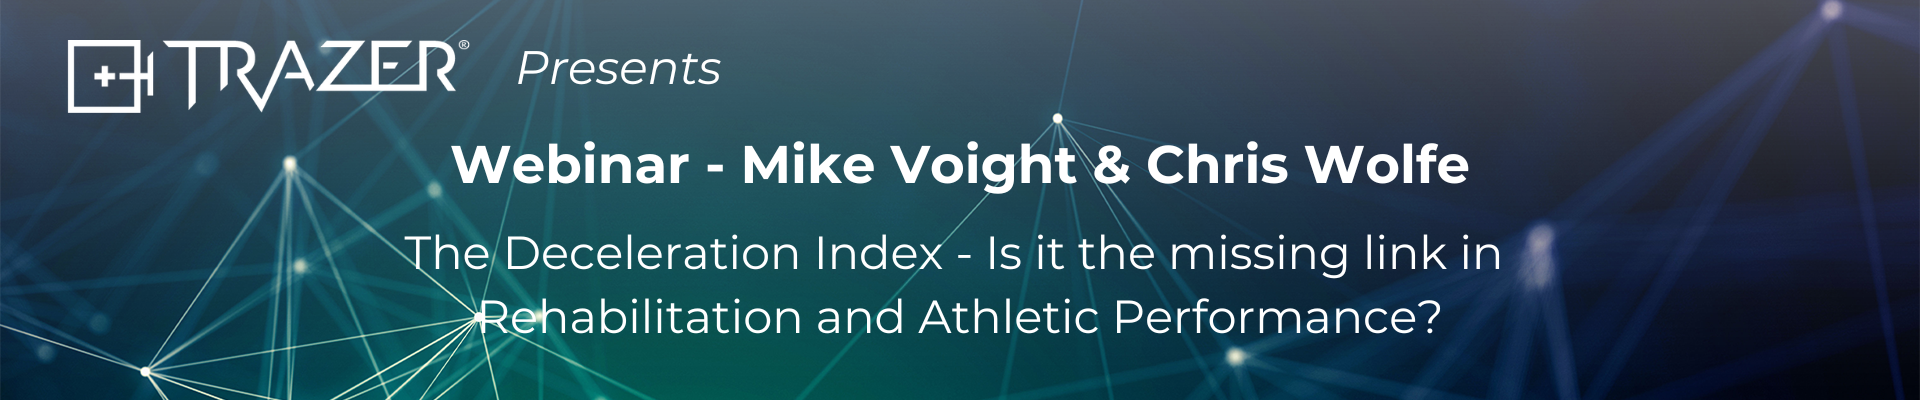 Webinar - Mike Voight & Chris Wolfe The Deceleration Index - Is it the missing link in Rehabilitation and Athletic Performance